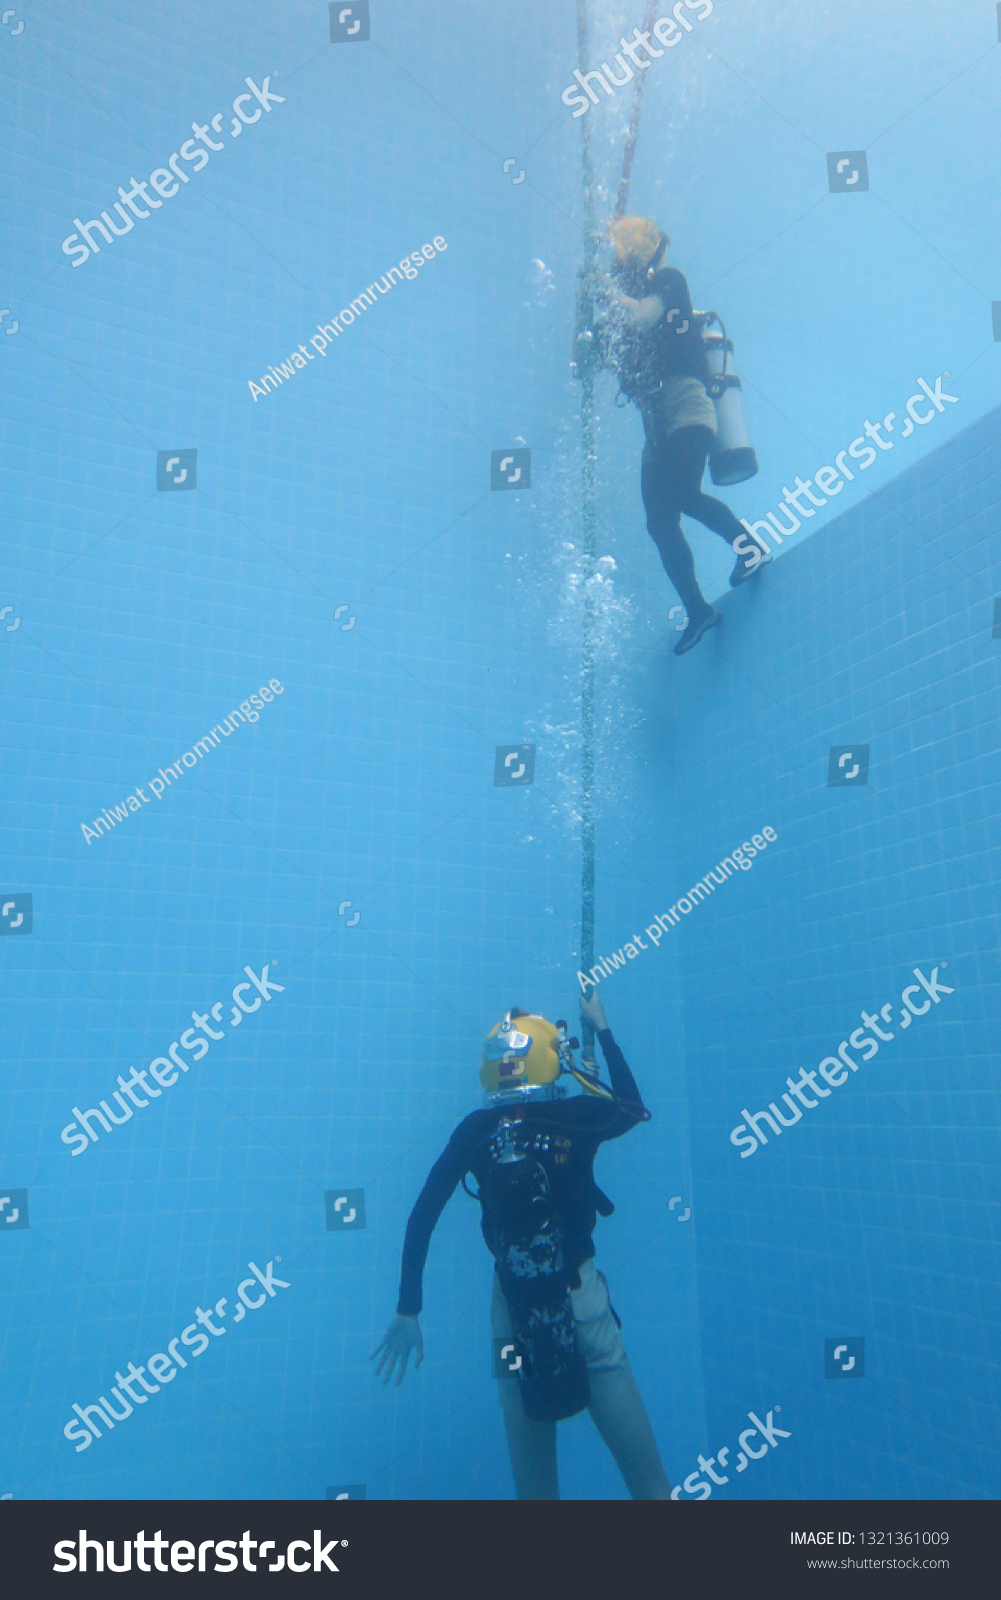 surface supplied commercial diver.
diver.
Underwater. #1321361009